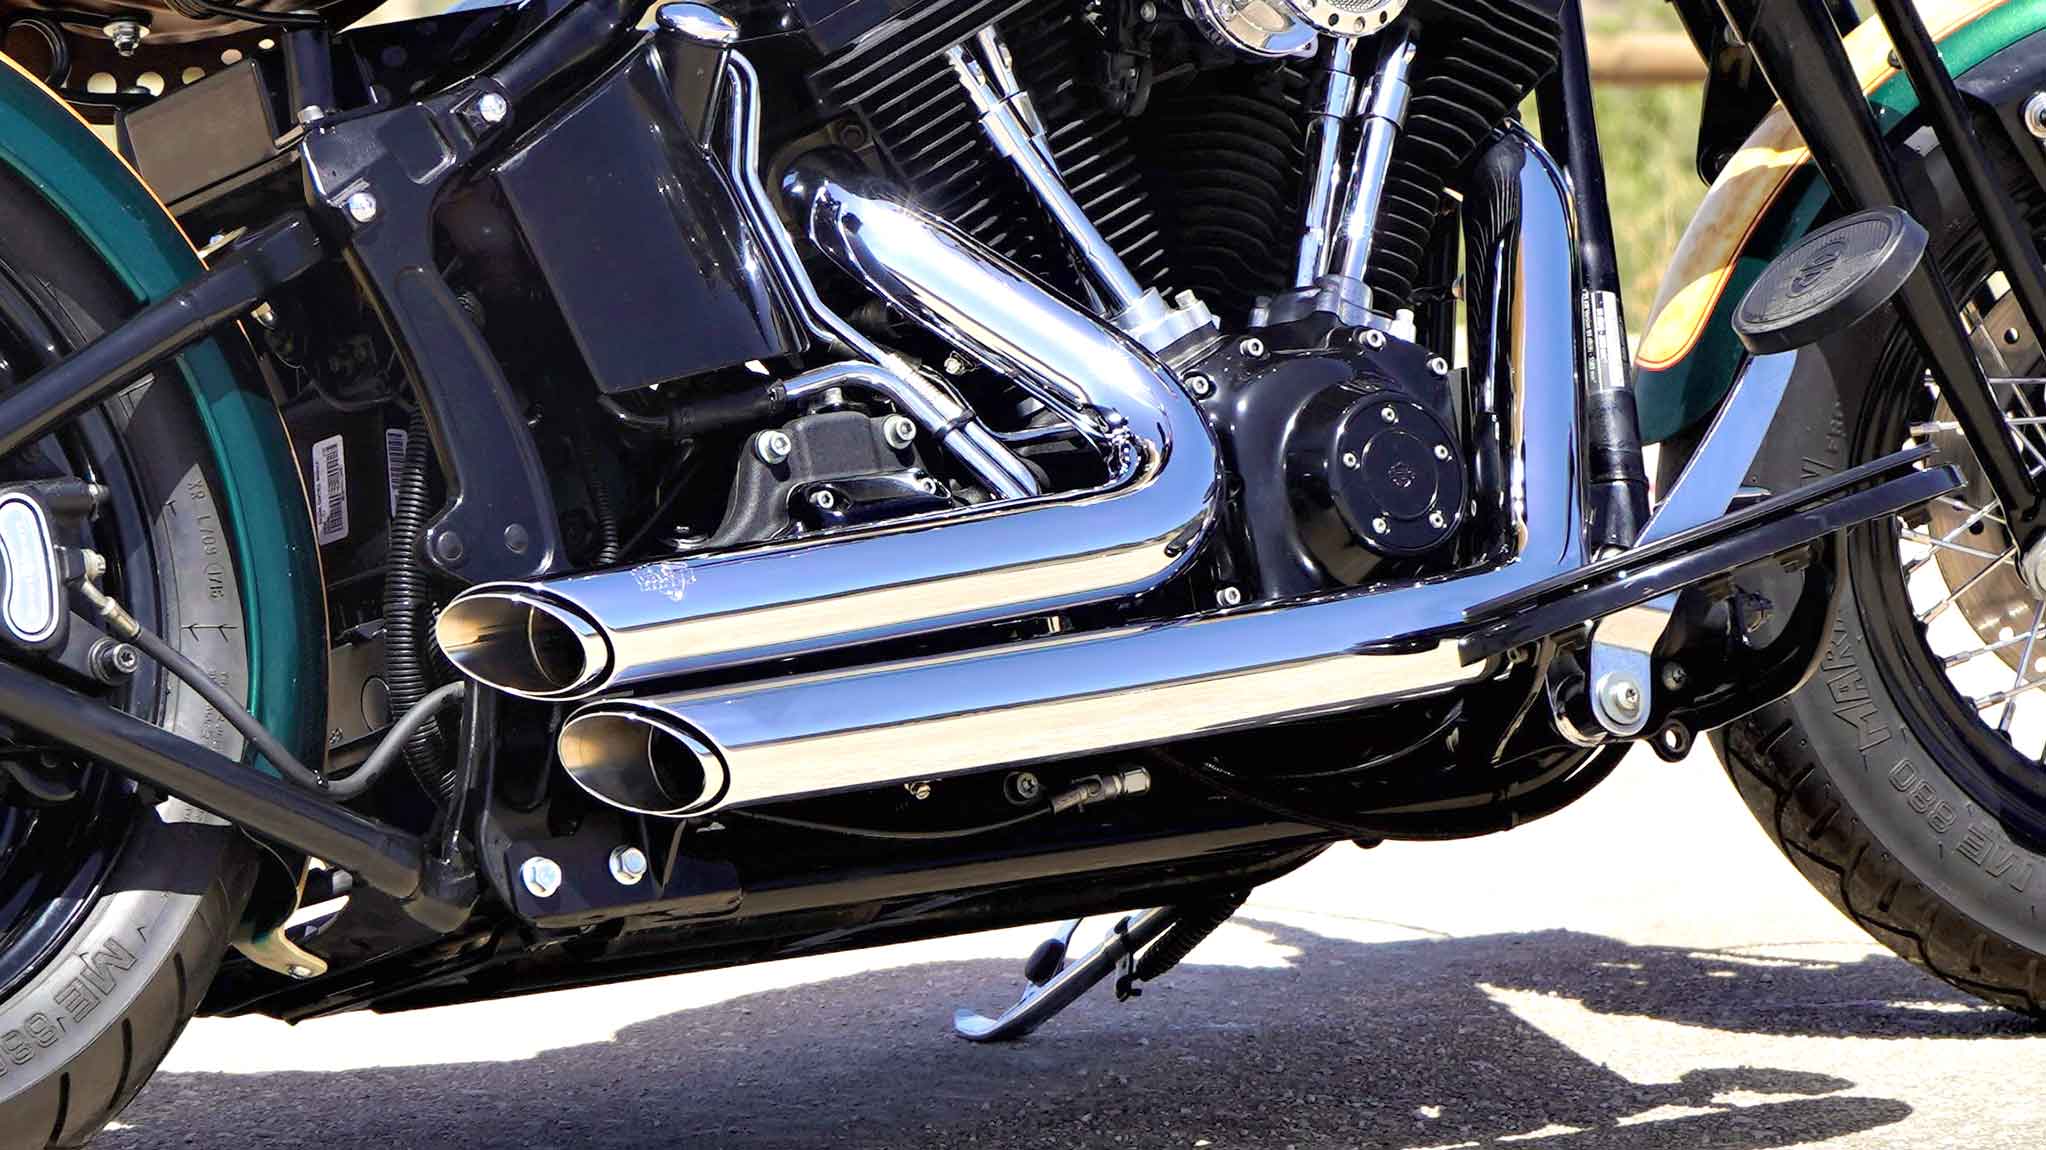 Exhaust pipes detail